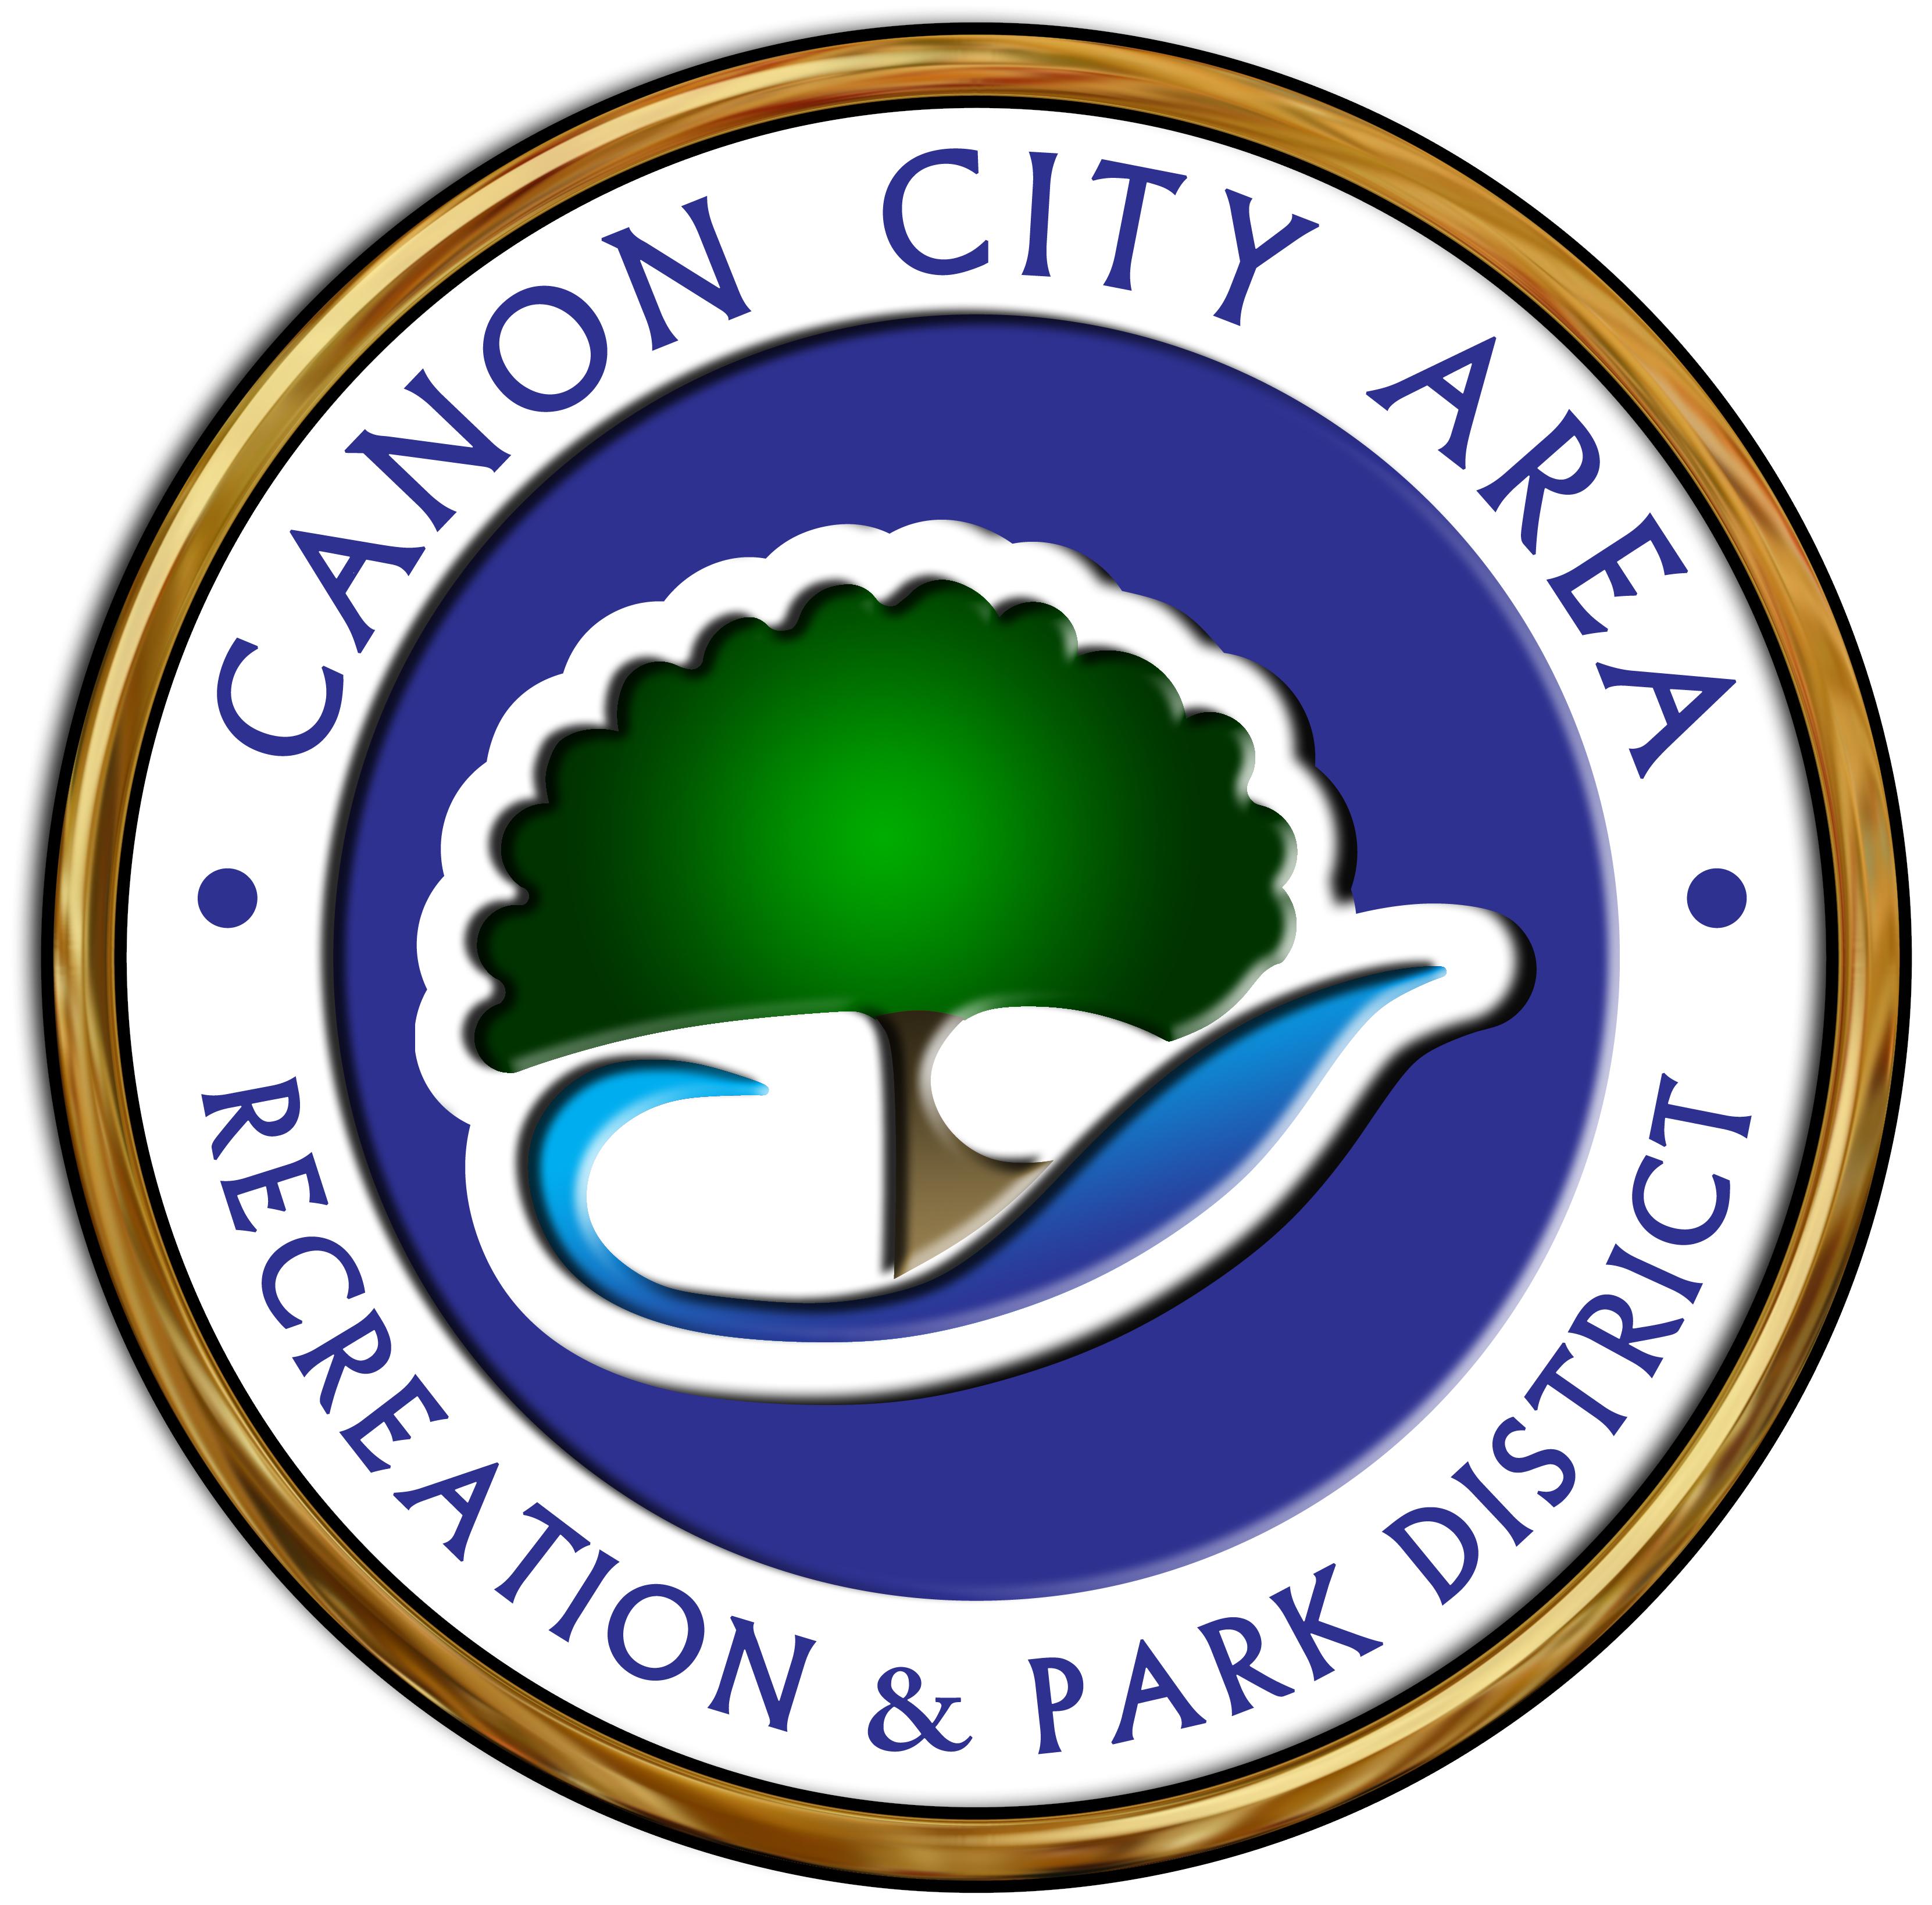 Organization logo of Canon City Area Recreation and Park District